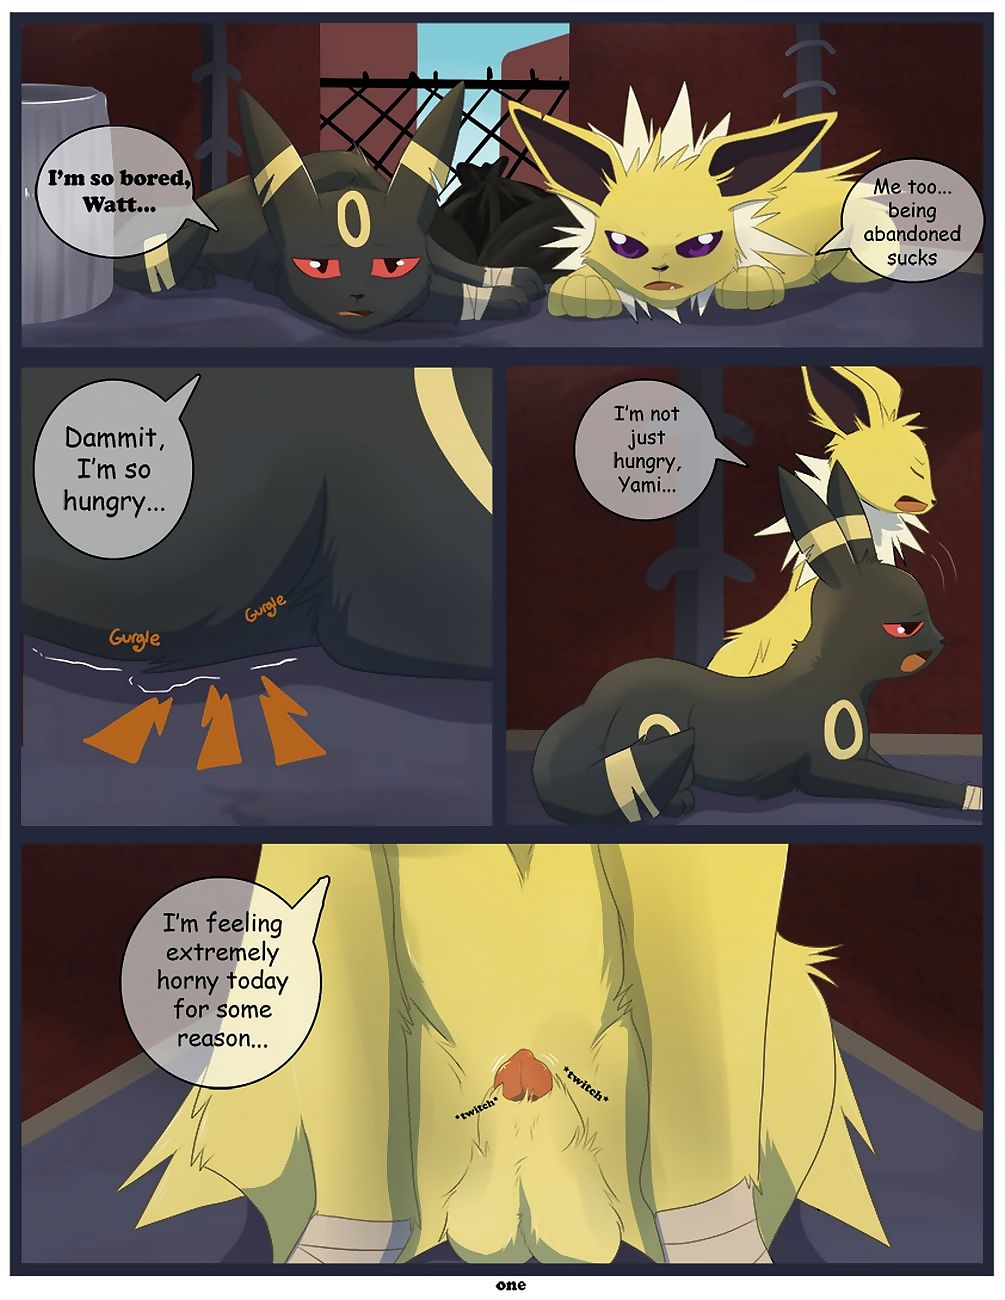 Nóng trouble! phần 2 page 1